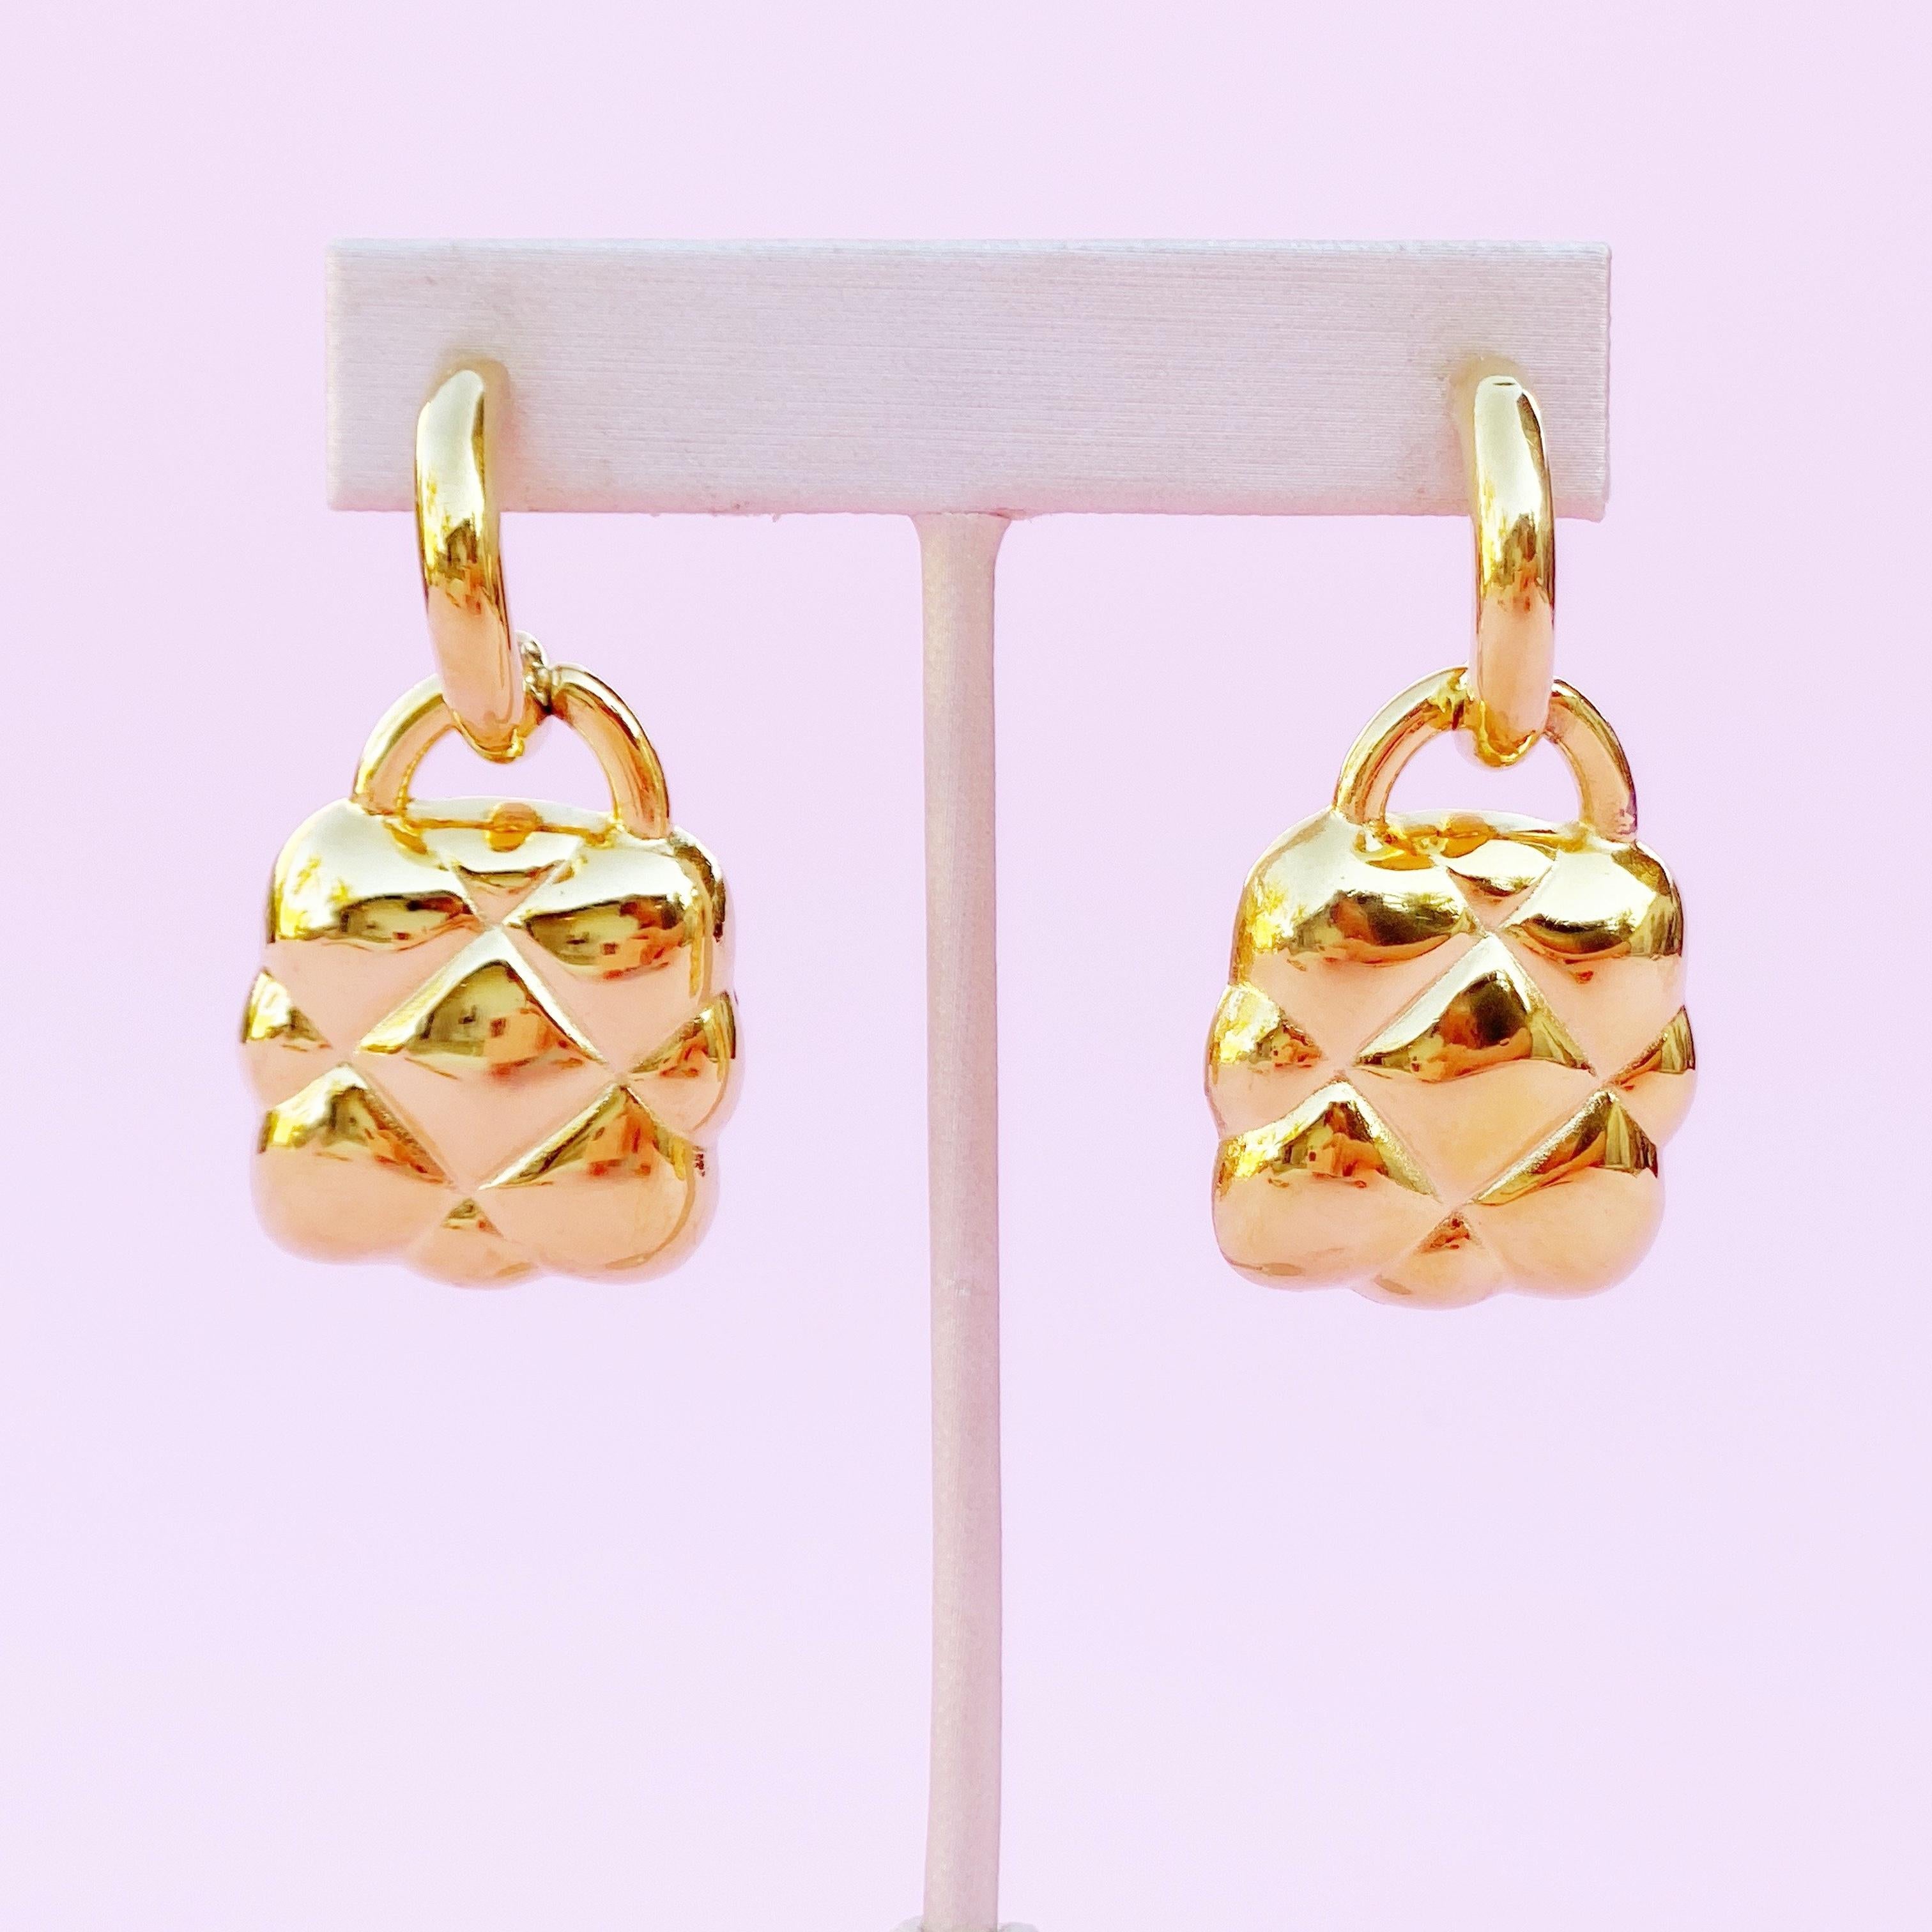 Modern Vintage Gilded Quilted Handbag Figural Drop Earrings by Anne Klein, 1980s For Sale